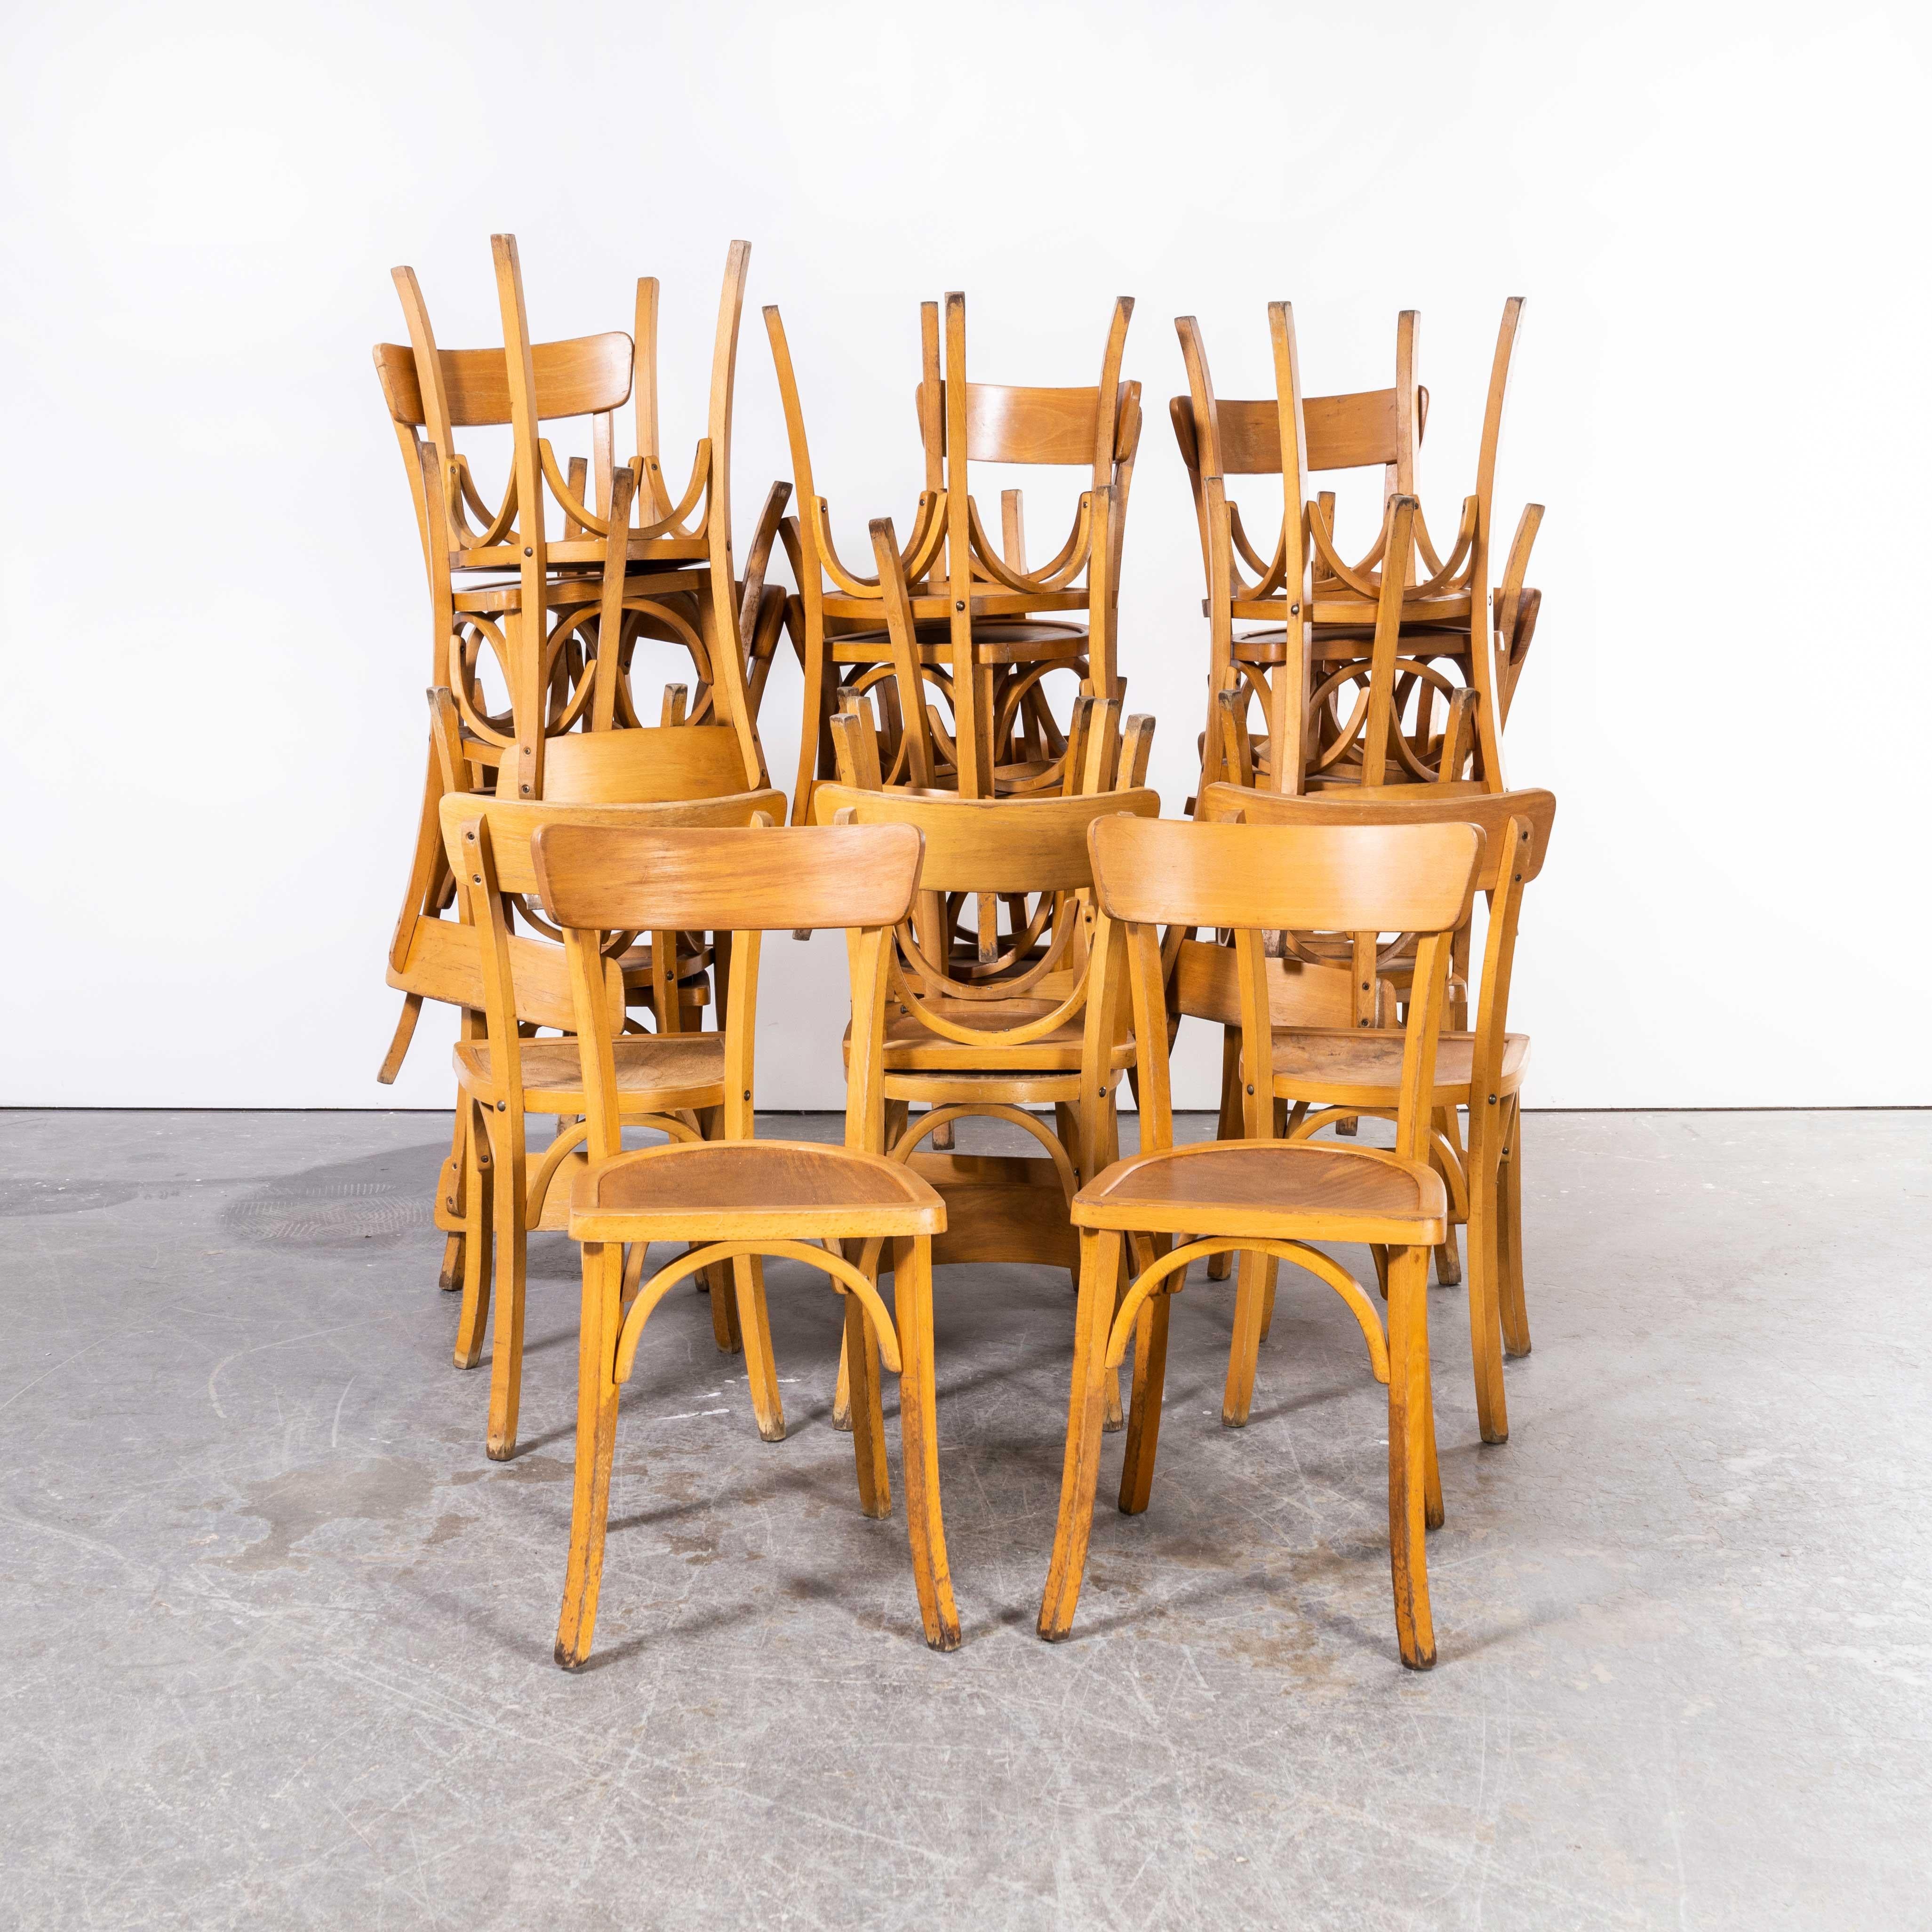 1950’s French Baumann Blonde kick leg bentwood dining chairs – various quantities available
1950’s French Baumann Blonde kick leg bentwood dining chairs – various quantities available. Baumann is a slightly off the radar French producer just